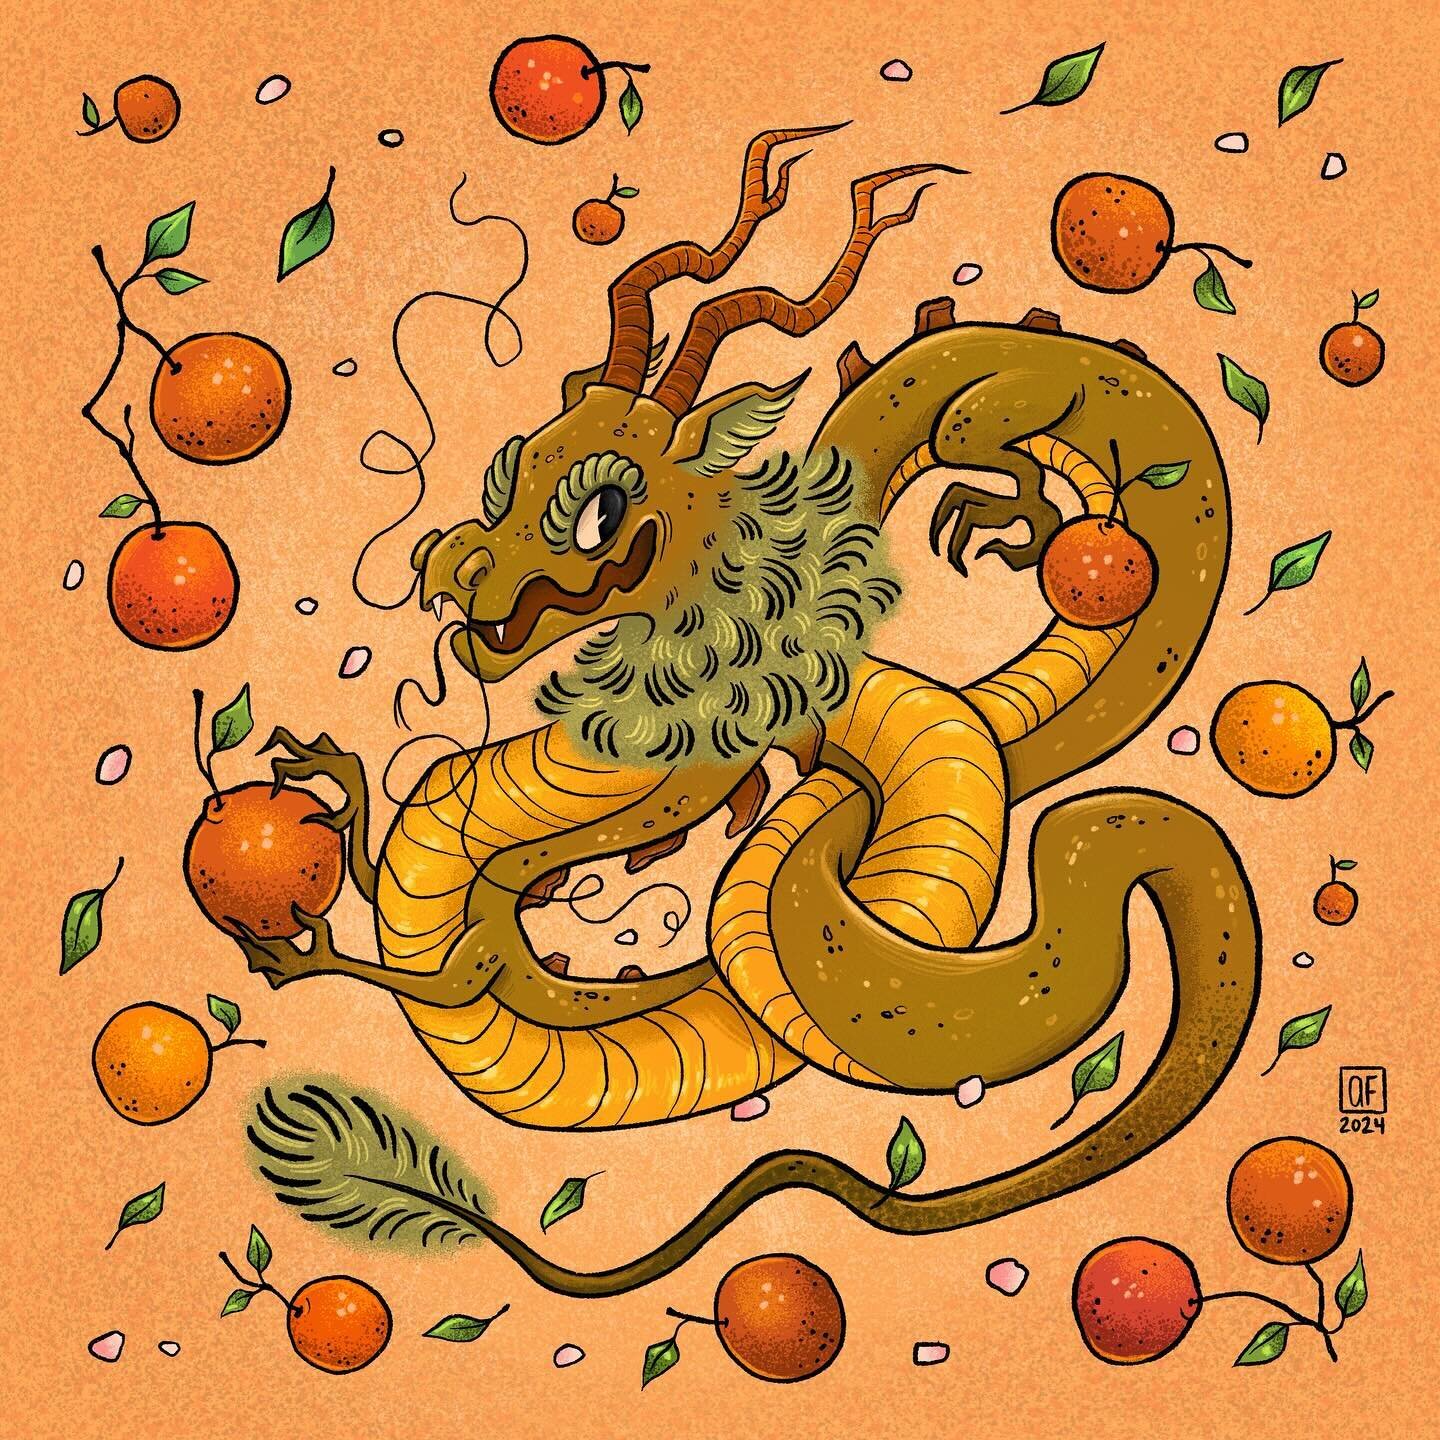 Happy Lunar New Year! 🧧🎉 2024 is the year of the Dragon, if ya didn&rsquo;t know 🐉 I made this digital illustration in #procreate with #retrosupplybrushes ! Prints will be added to online shop soon ❤️
*
*
*
#yearofthedragon #lunarnewyear #chinesez